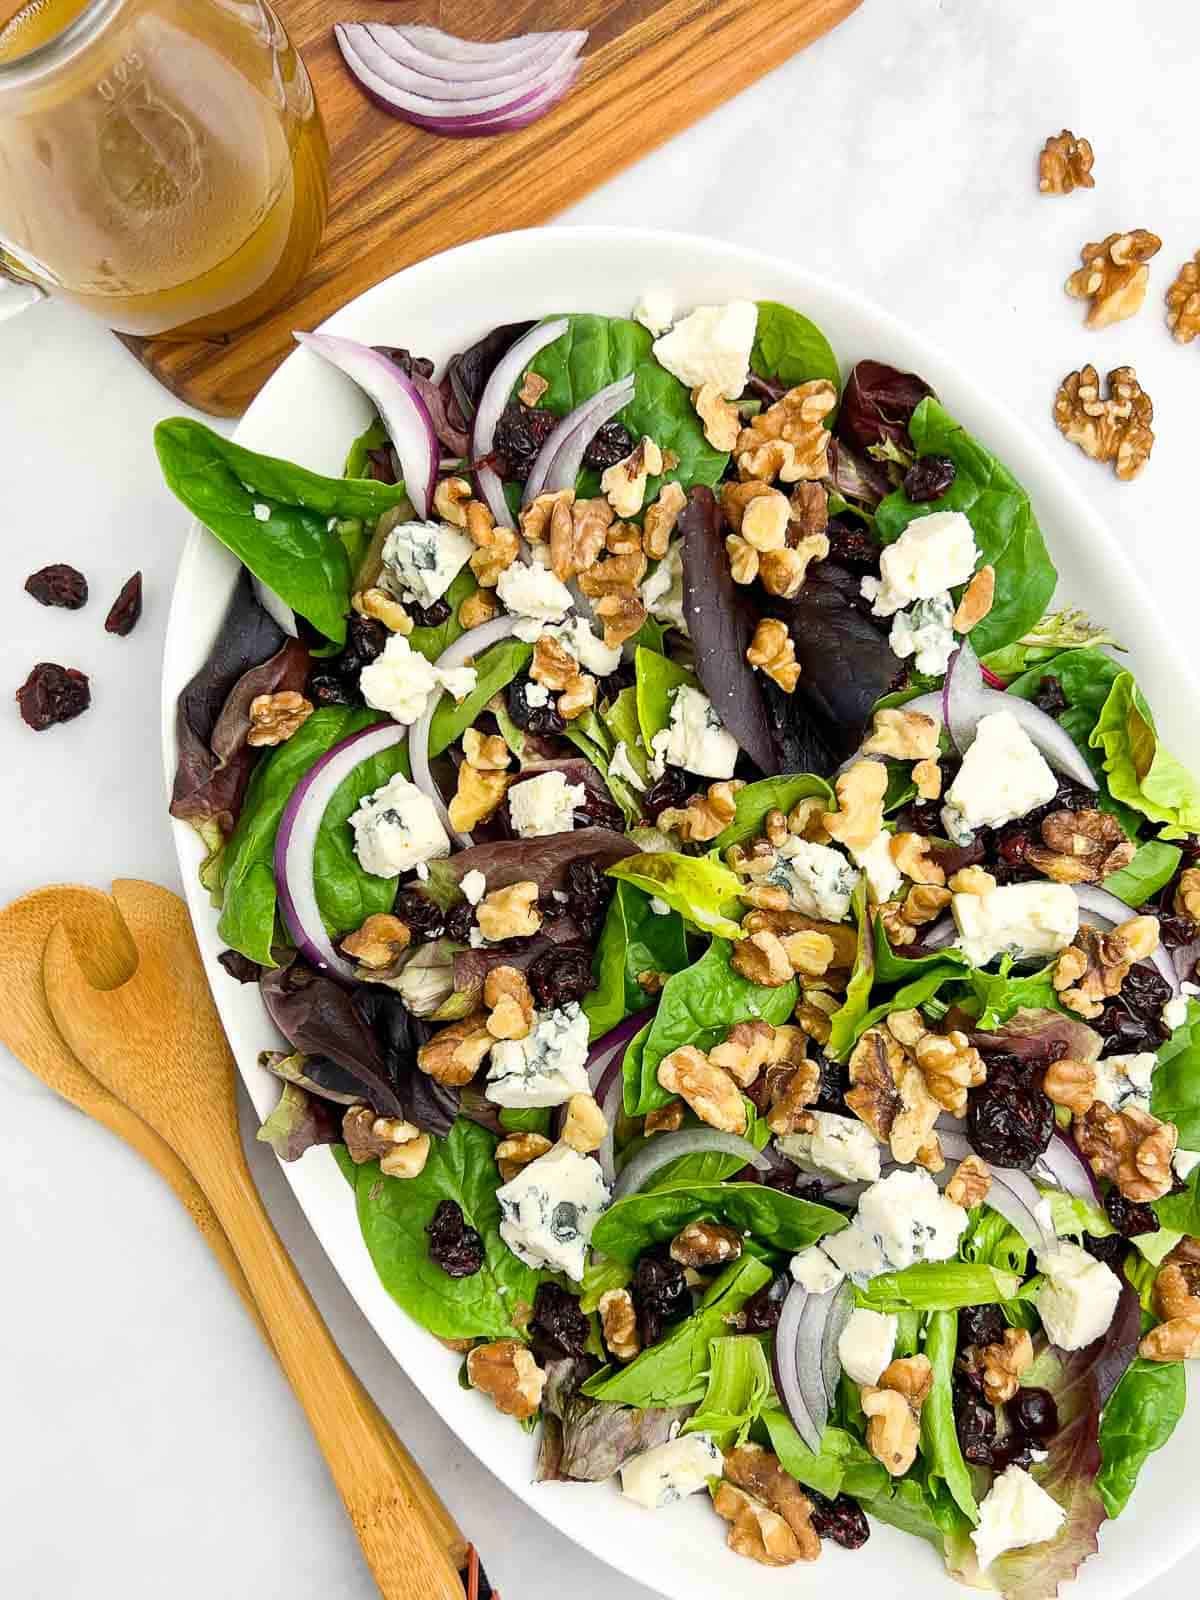 Overhead view of a white bowl filled with a green salad with blue cheese, walnuts and cranberries.